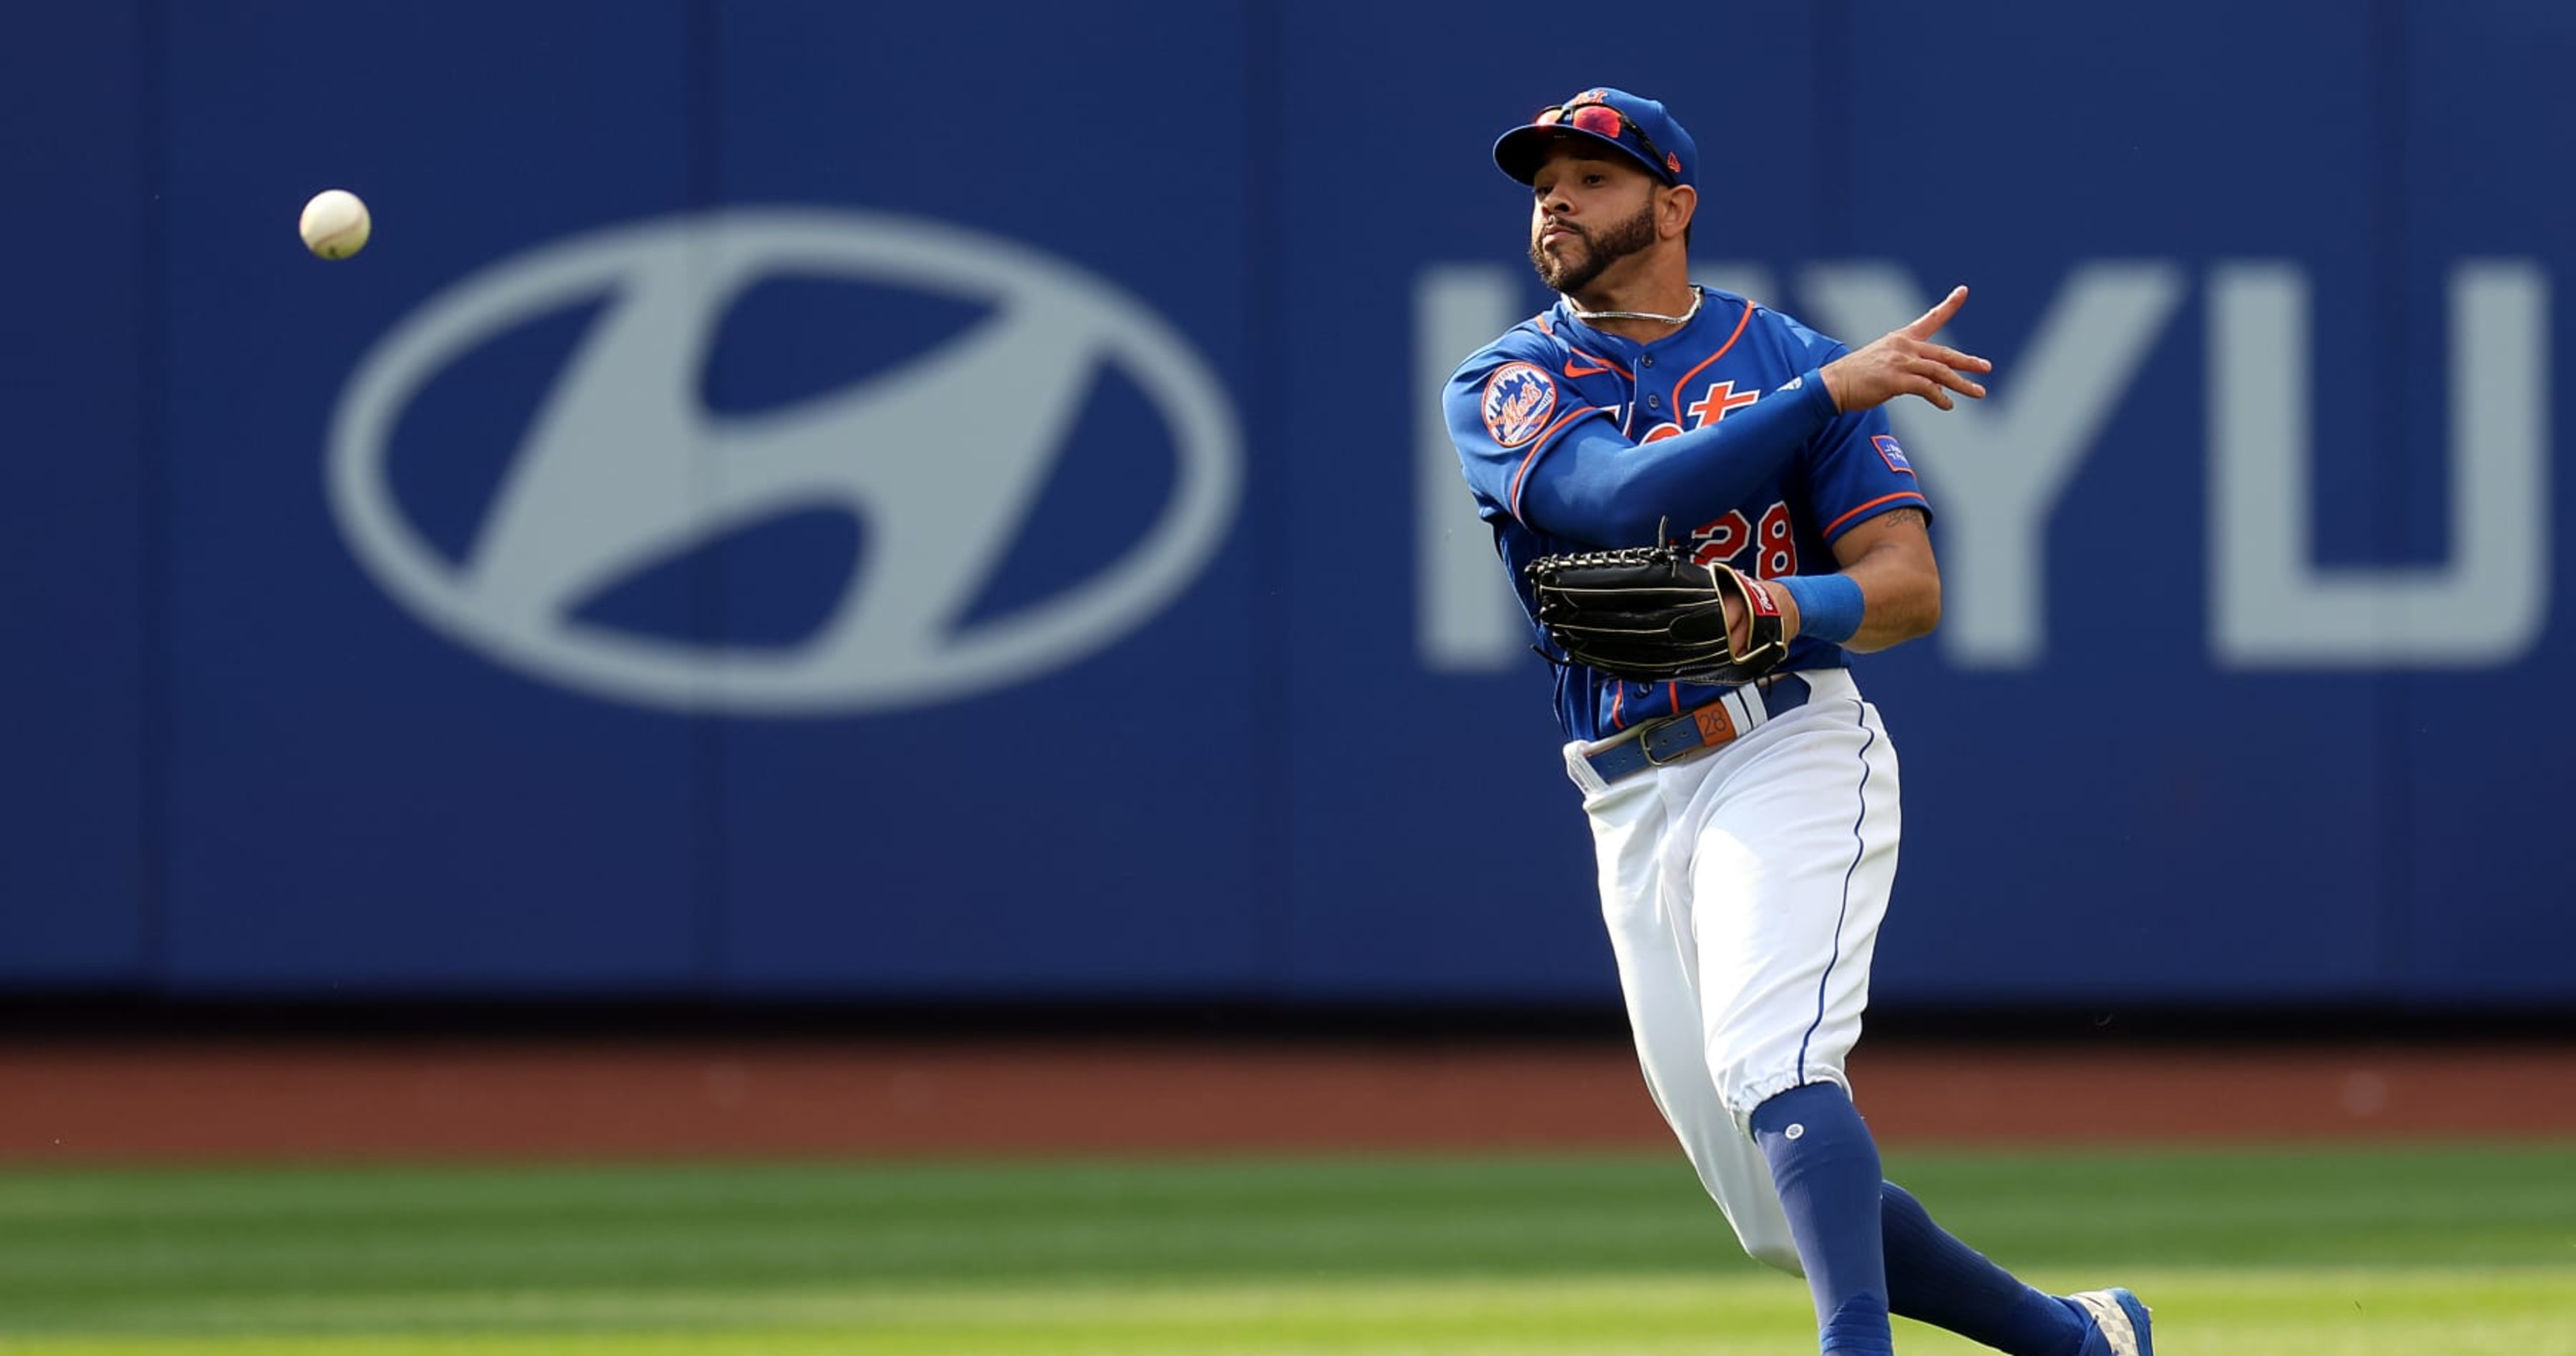 Mets' Tommy Pham 'Trying to Prove a F--king Point' After Analytics